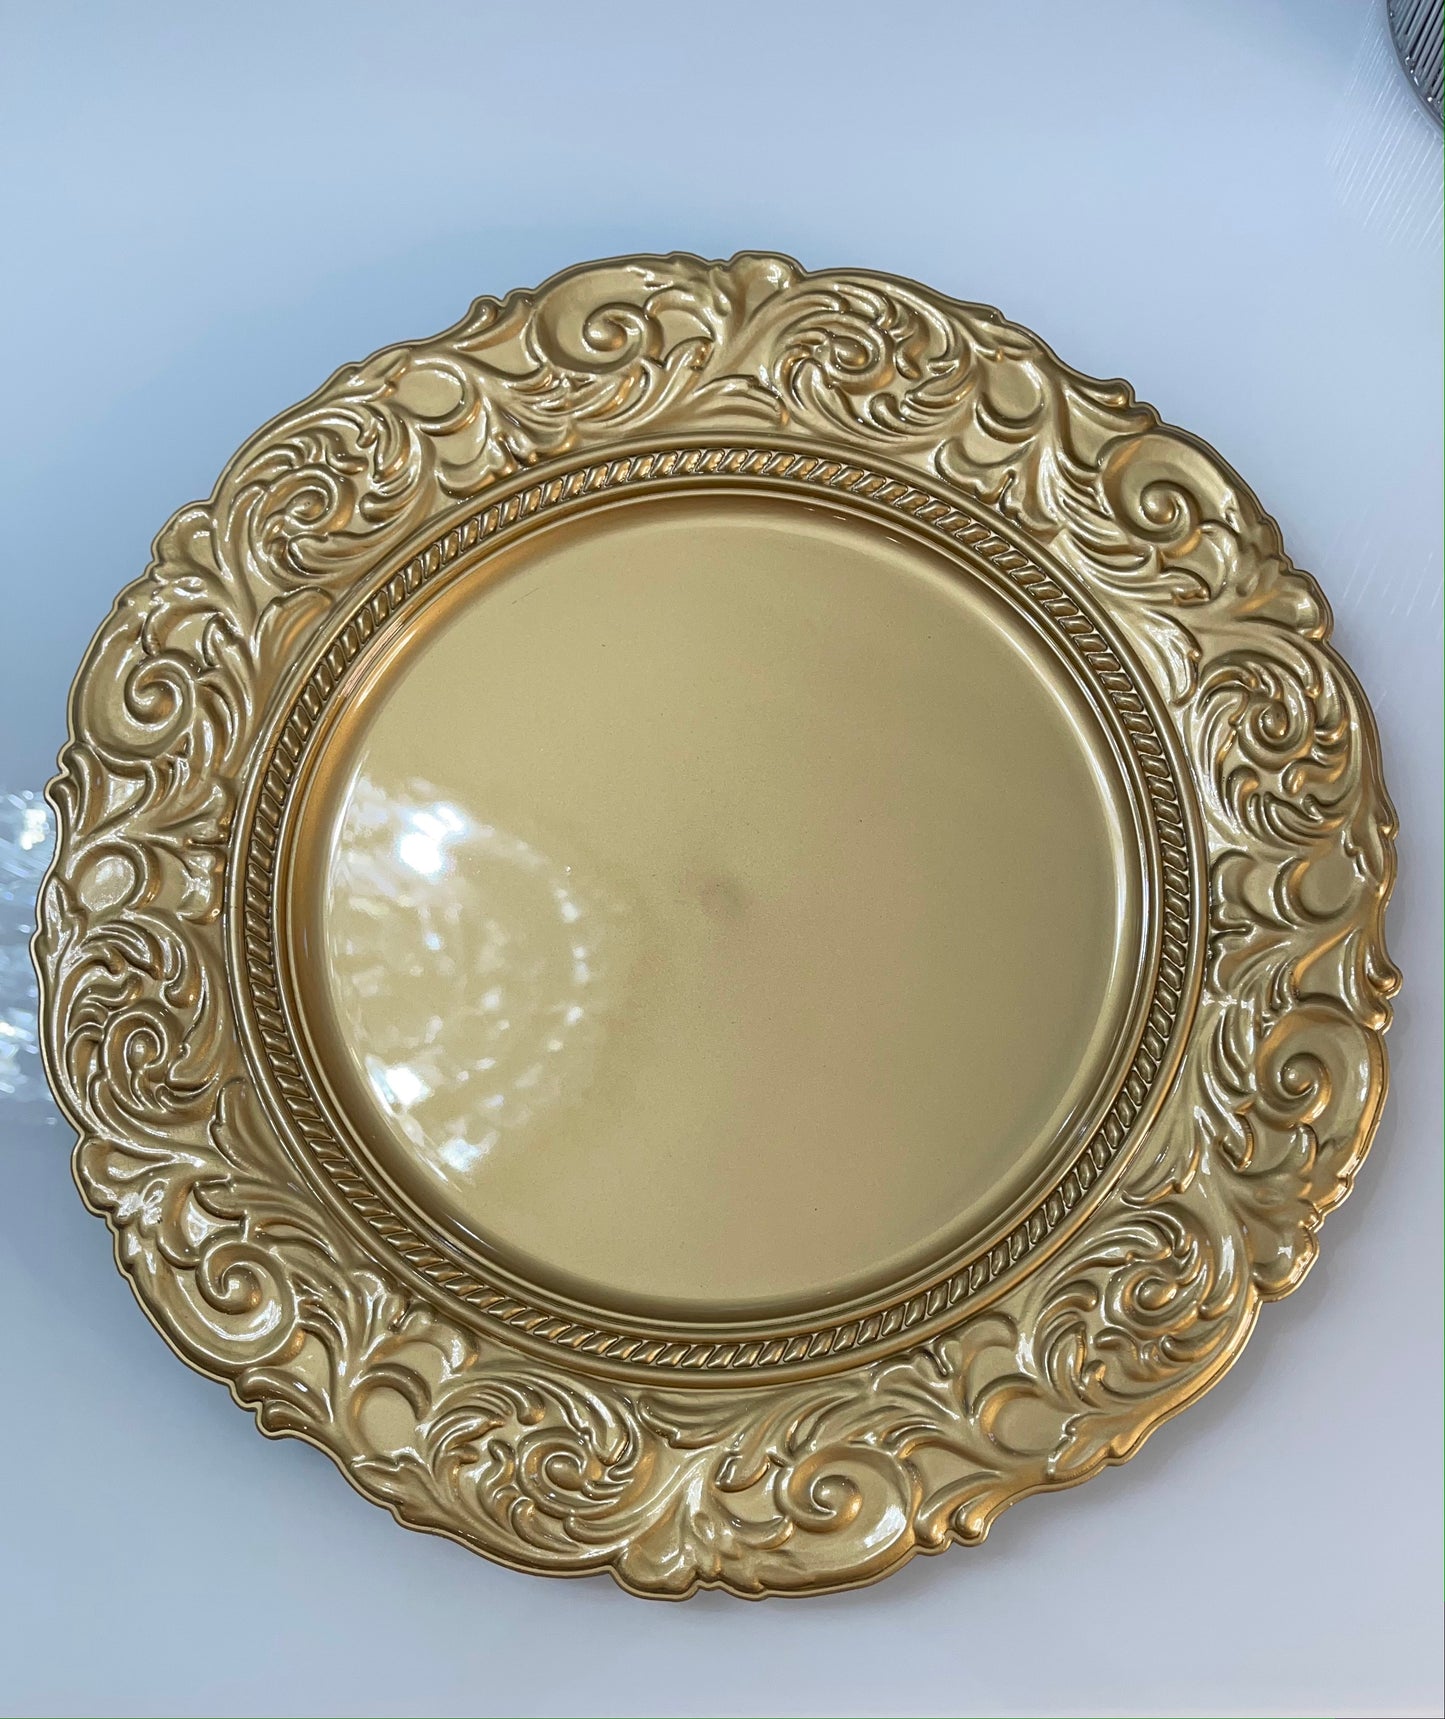 Angelie French Style Charger Plates, Set of 6